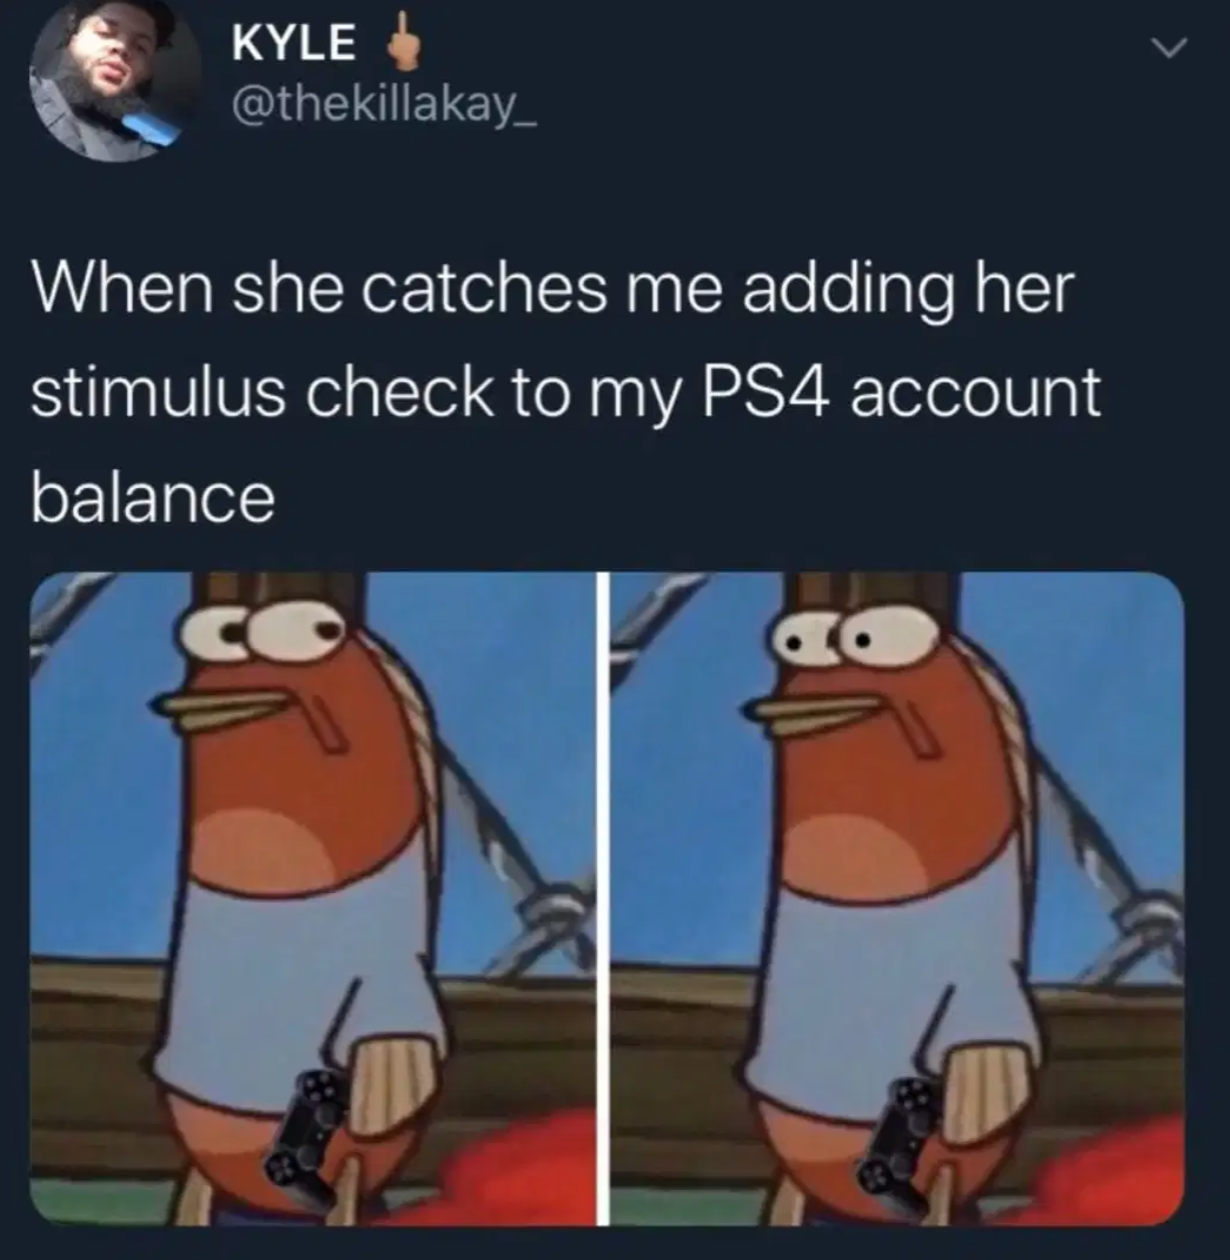 funny gaming memes - cartoon - Kyle When she catches me adding her stimulus check to my PS4 account balance